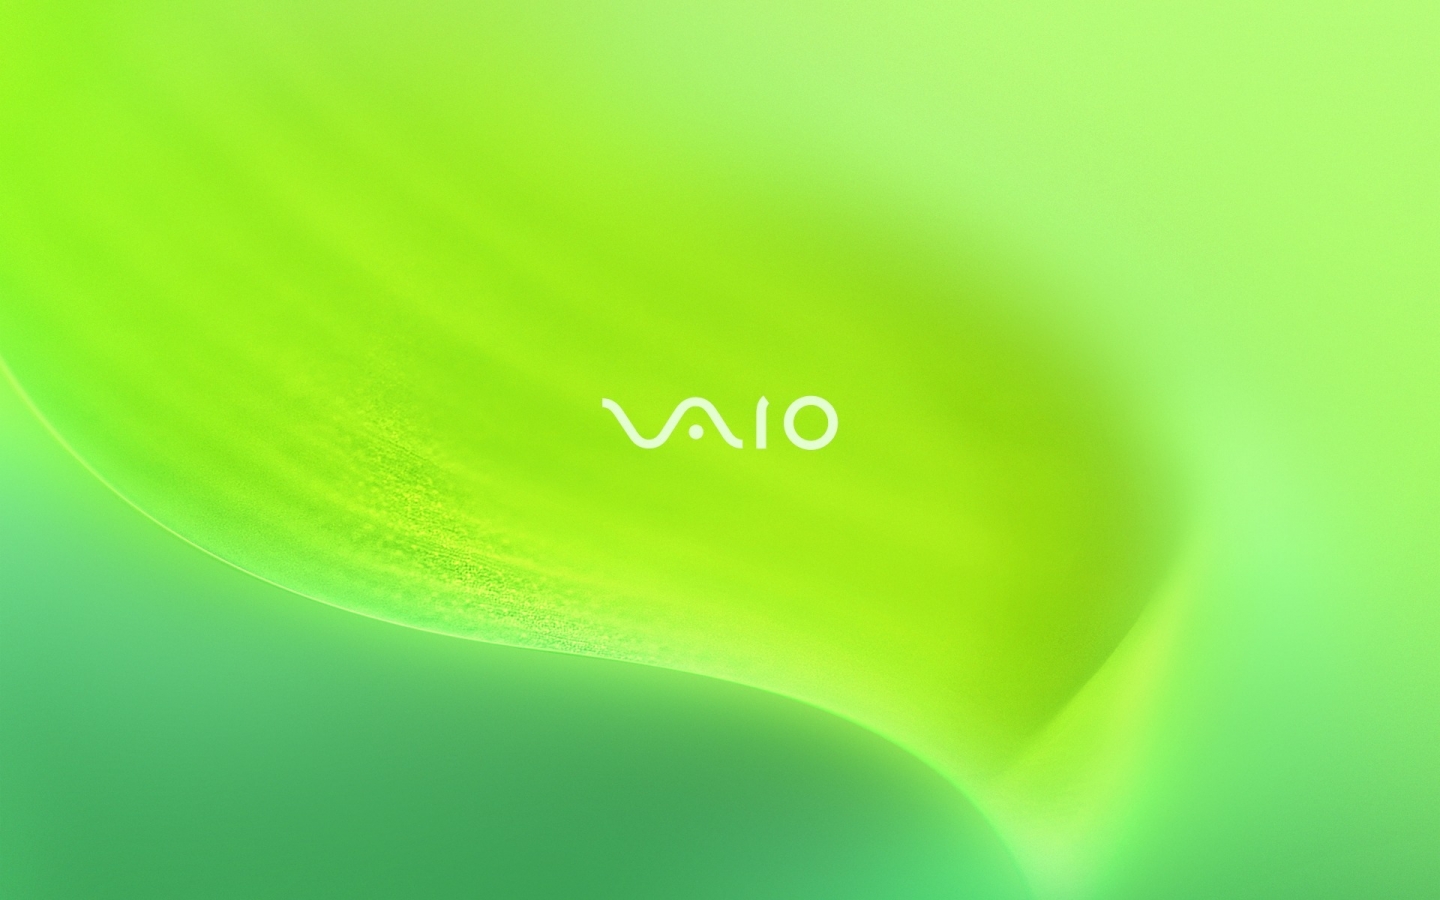 Vaio Green Leaf for 1440 x 900 widescreen resolution